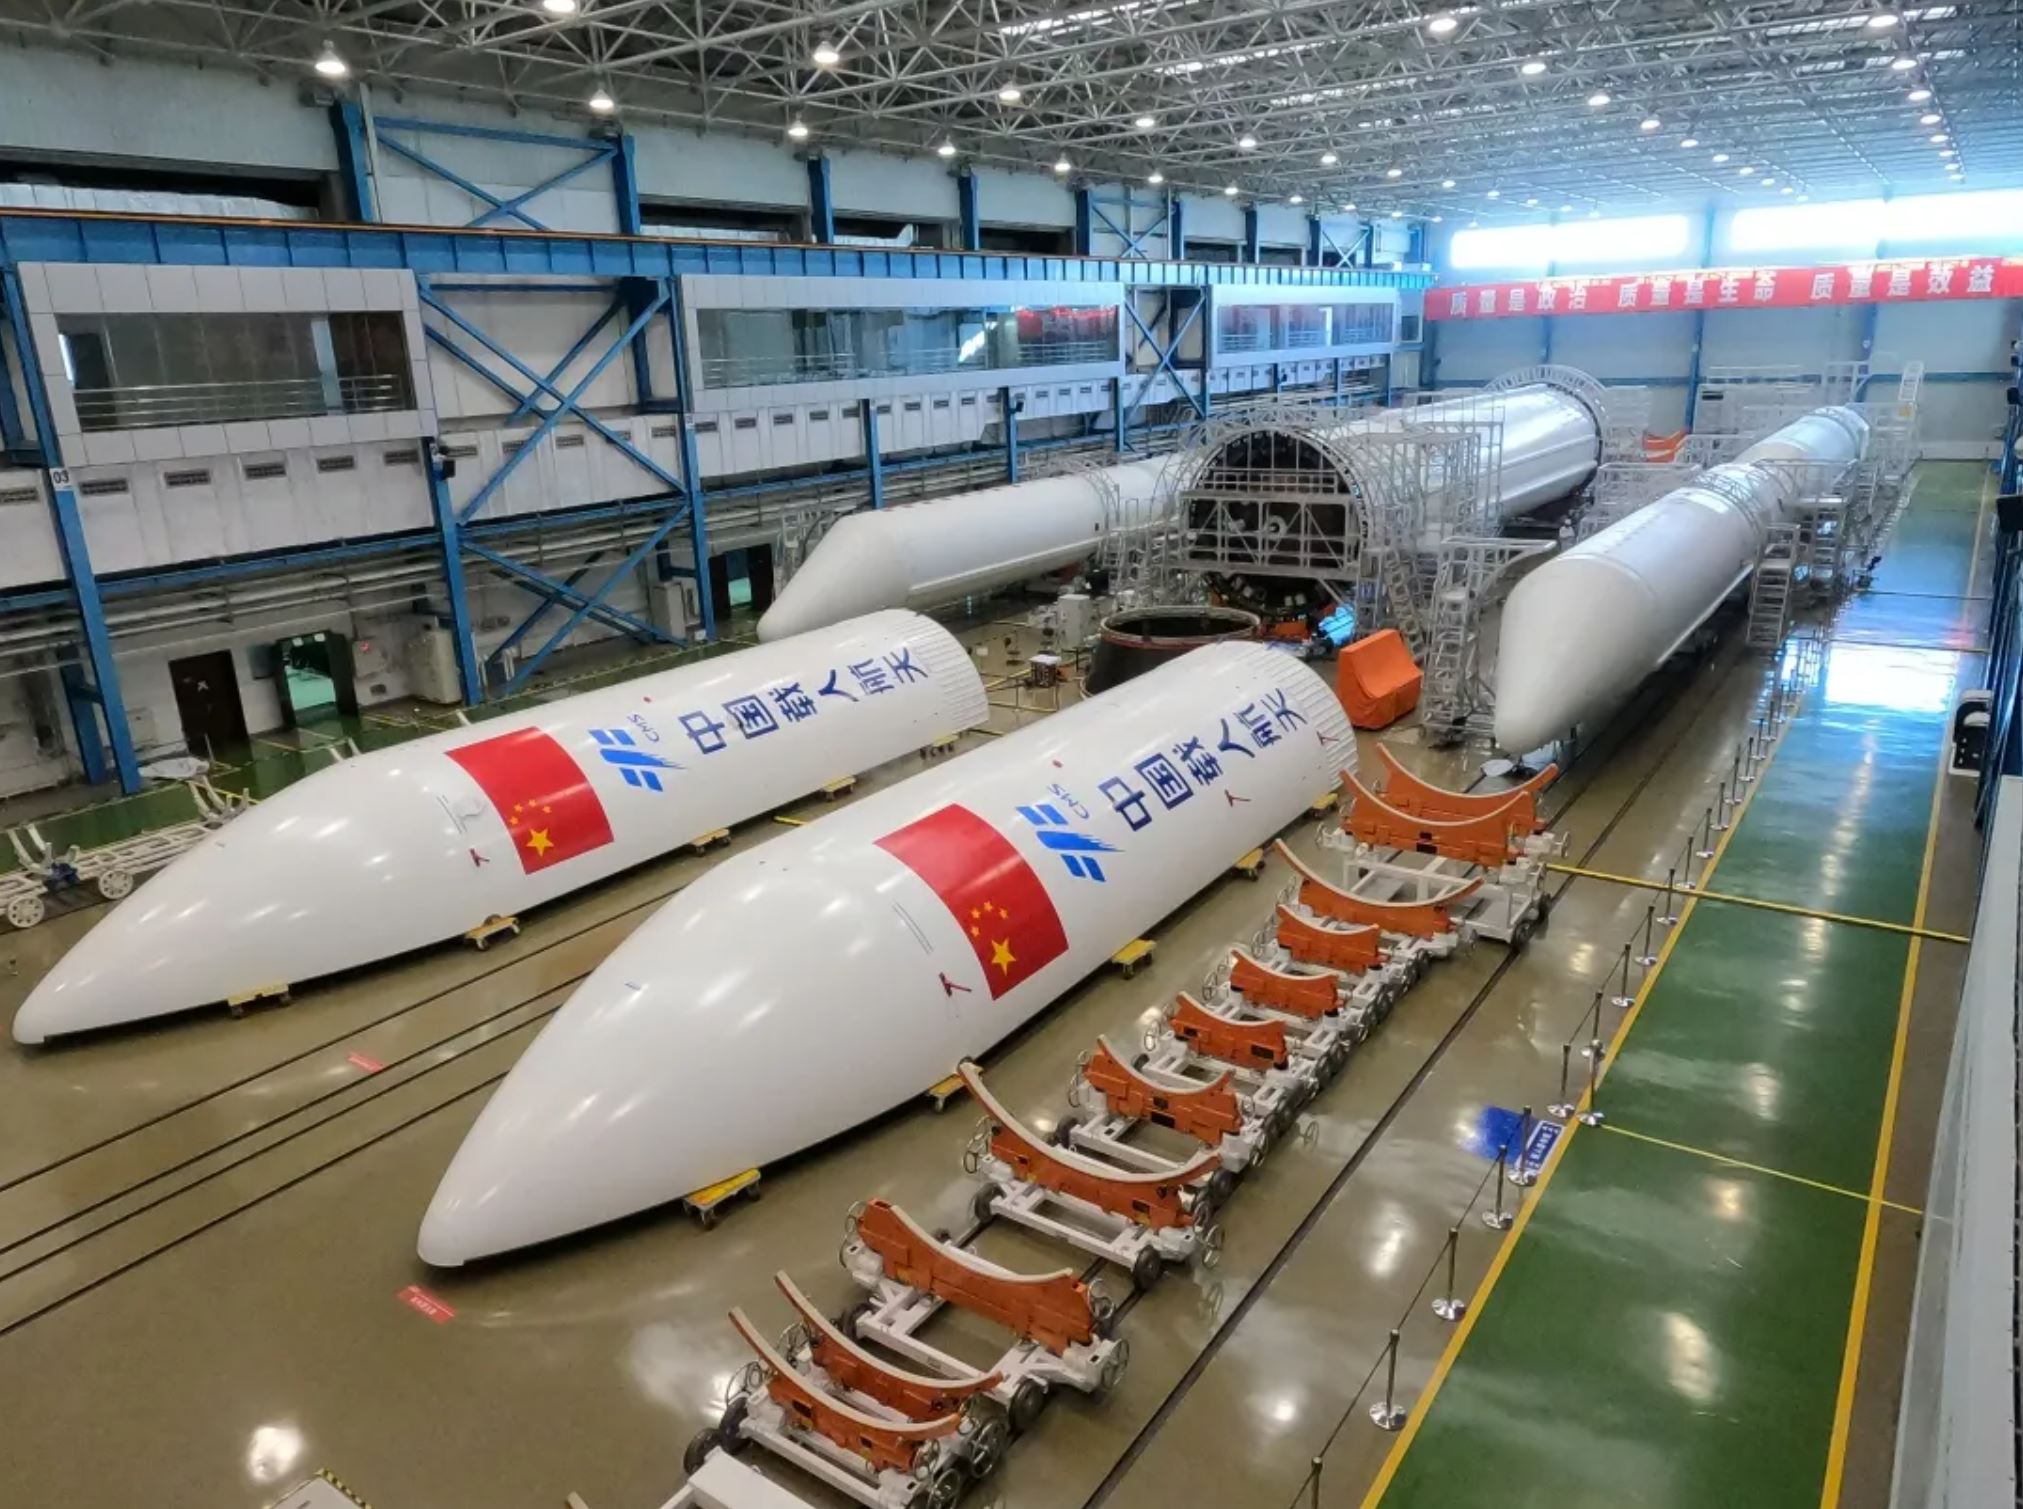 Rockets carrying pieces of the Tiangong space station